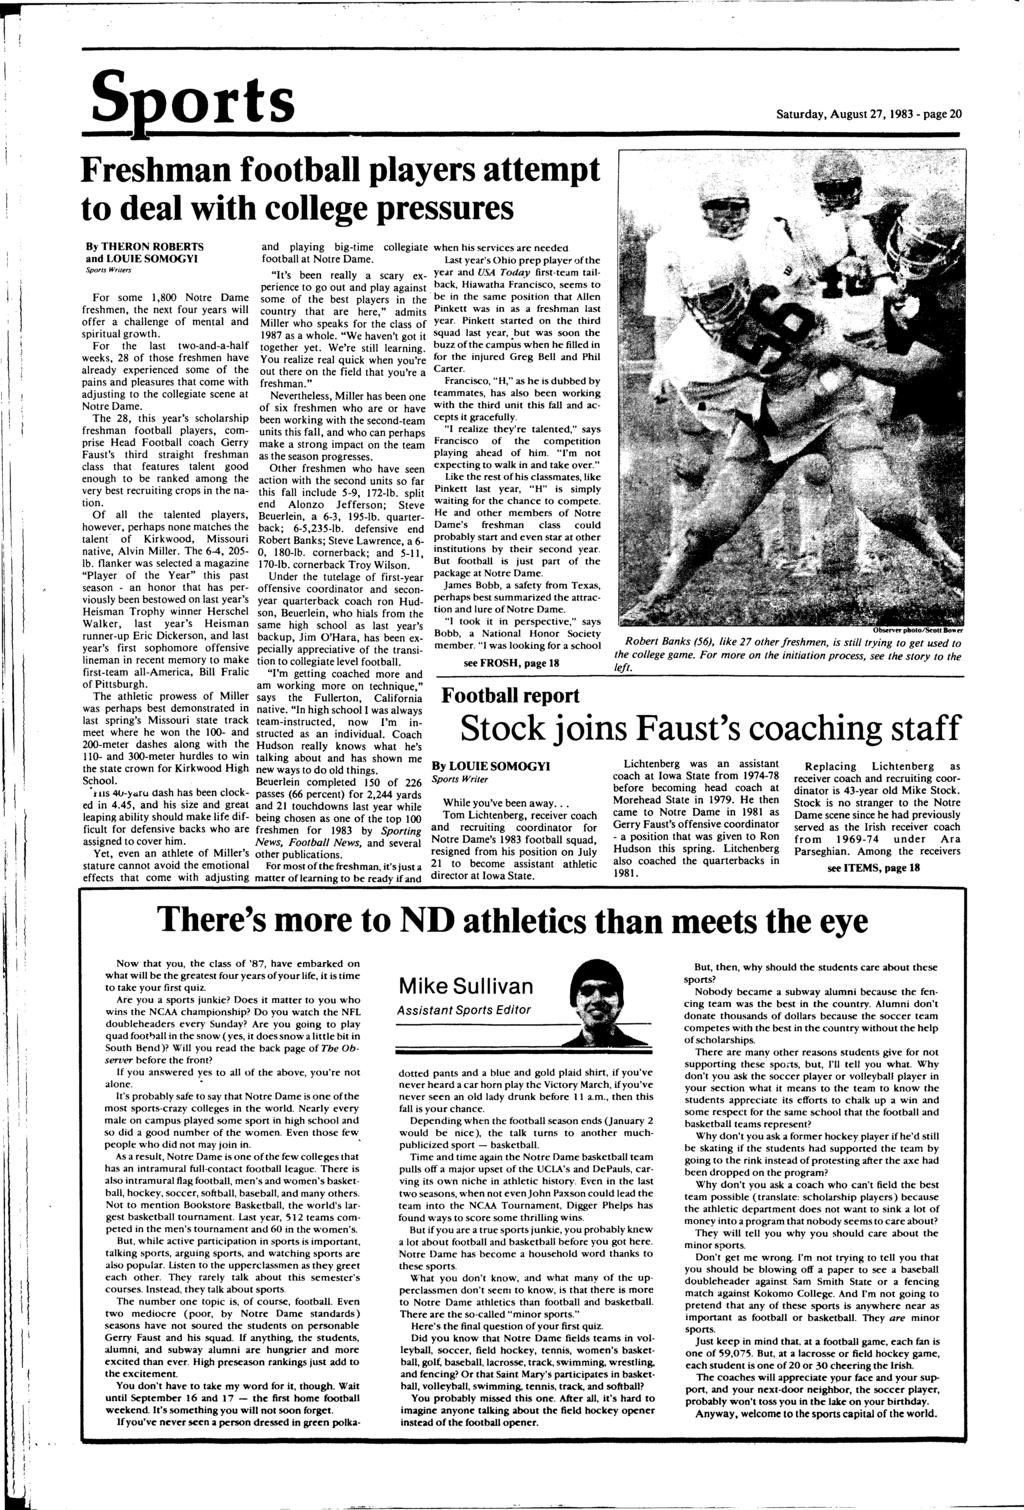 Seors Saurday, Augus 27, 1983 - page 20 Freshman fooball players aemp o deal wih college pressures \. : By THERON ROBERTS and playing big-ime collegiae when his services are needed.